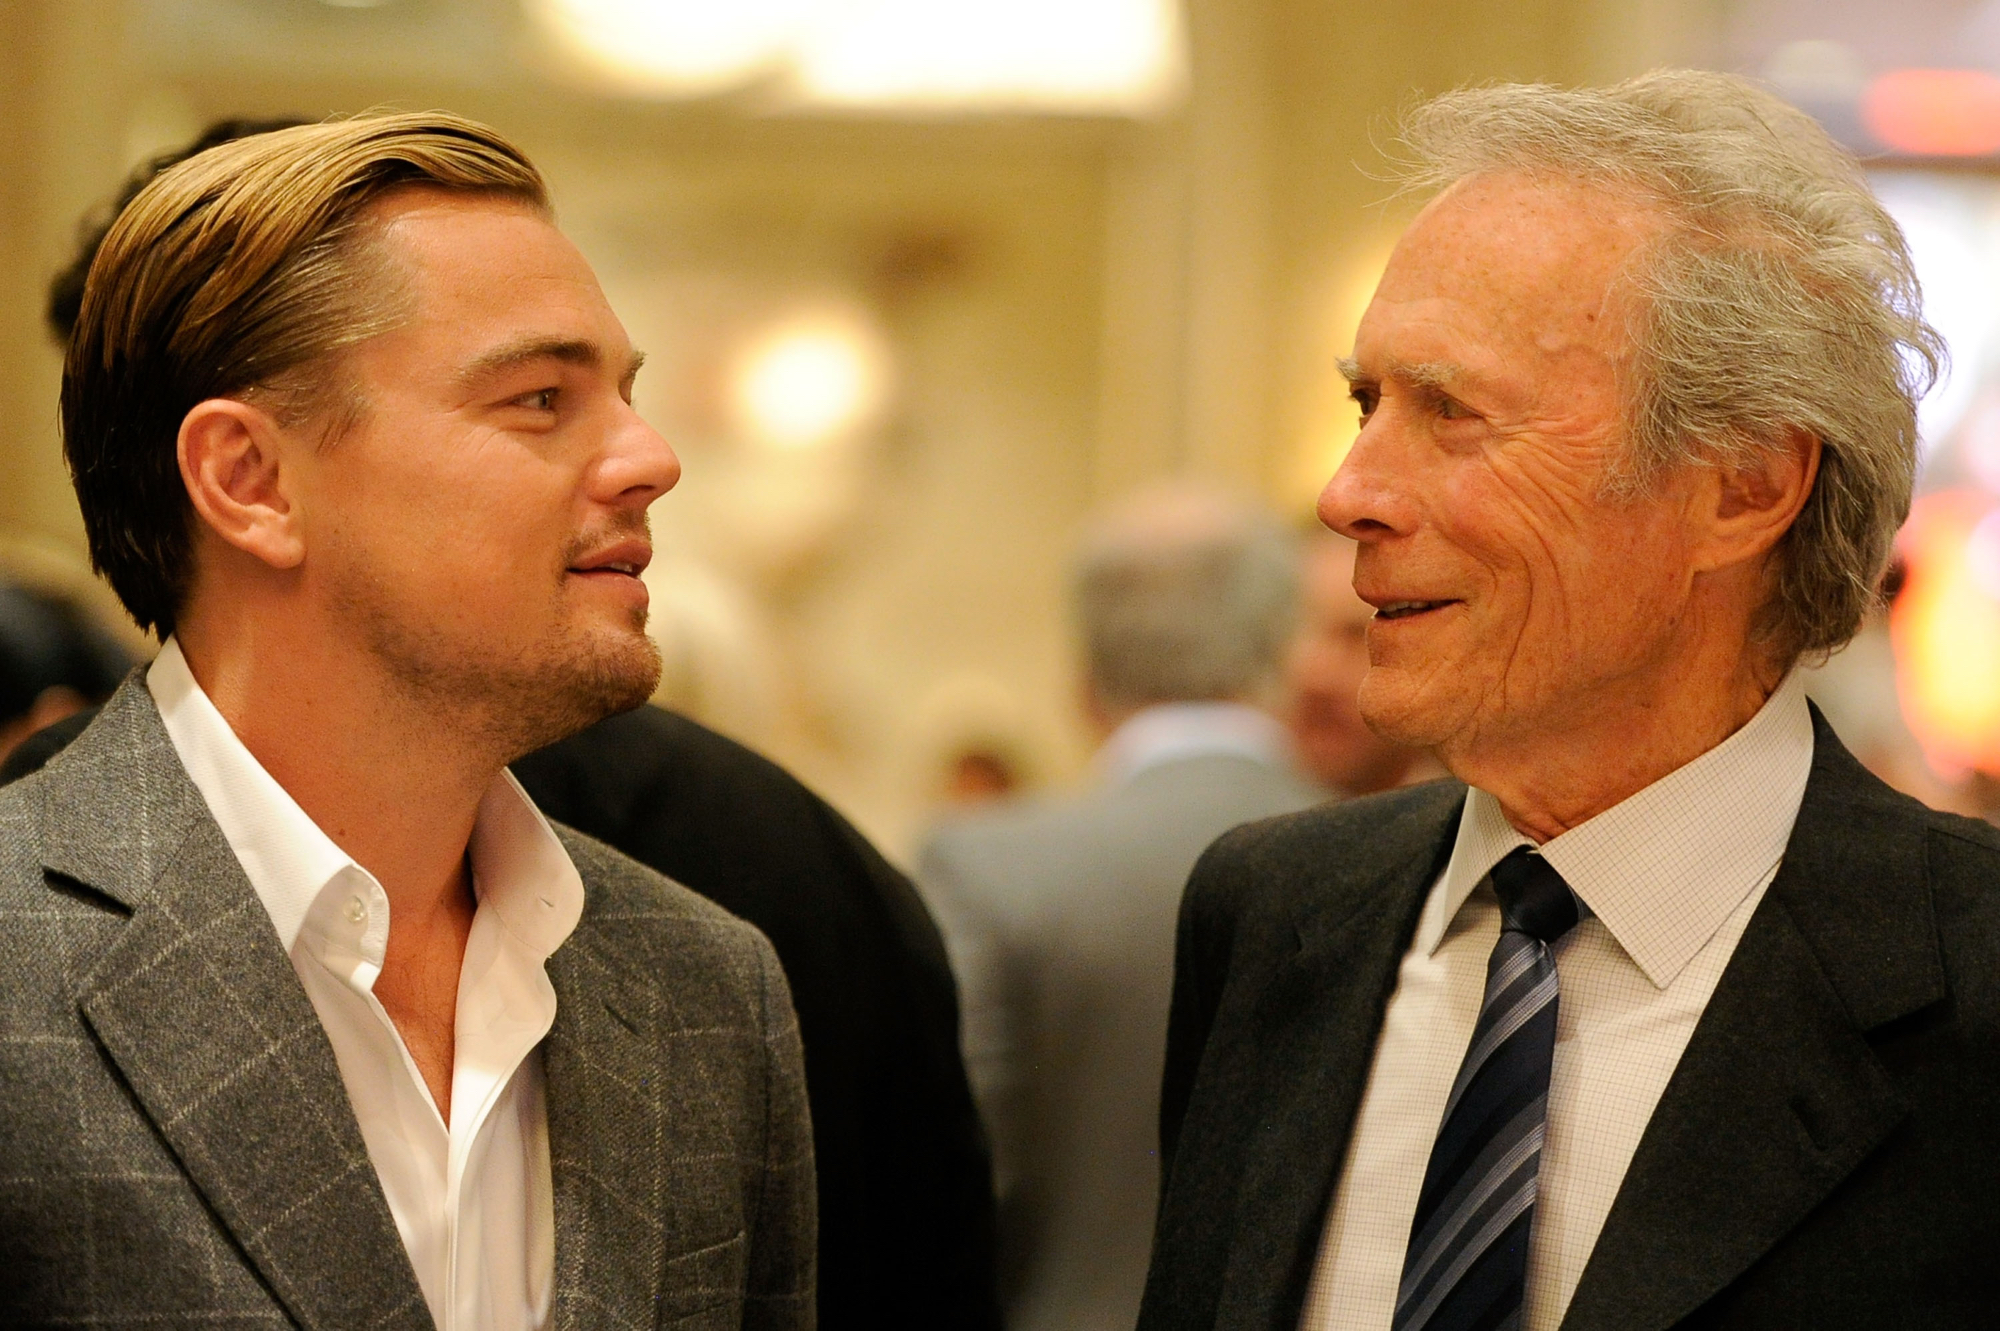 'J. Edgar' star Leonardo DiCaprio and Clint Eastwood facing each other in suits